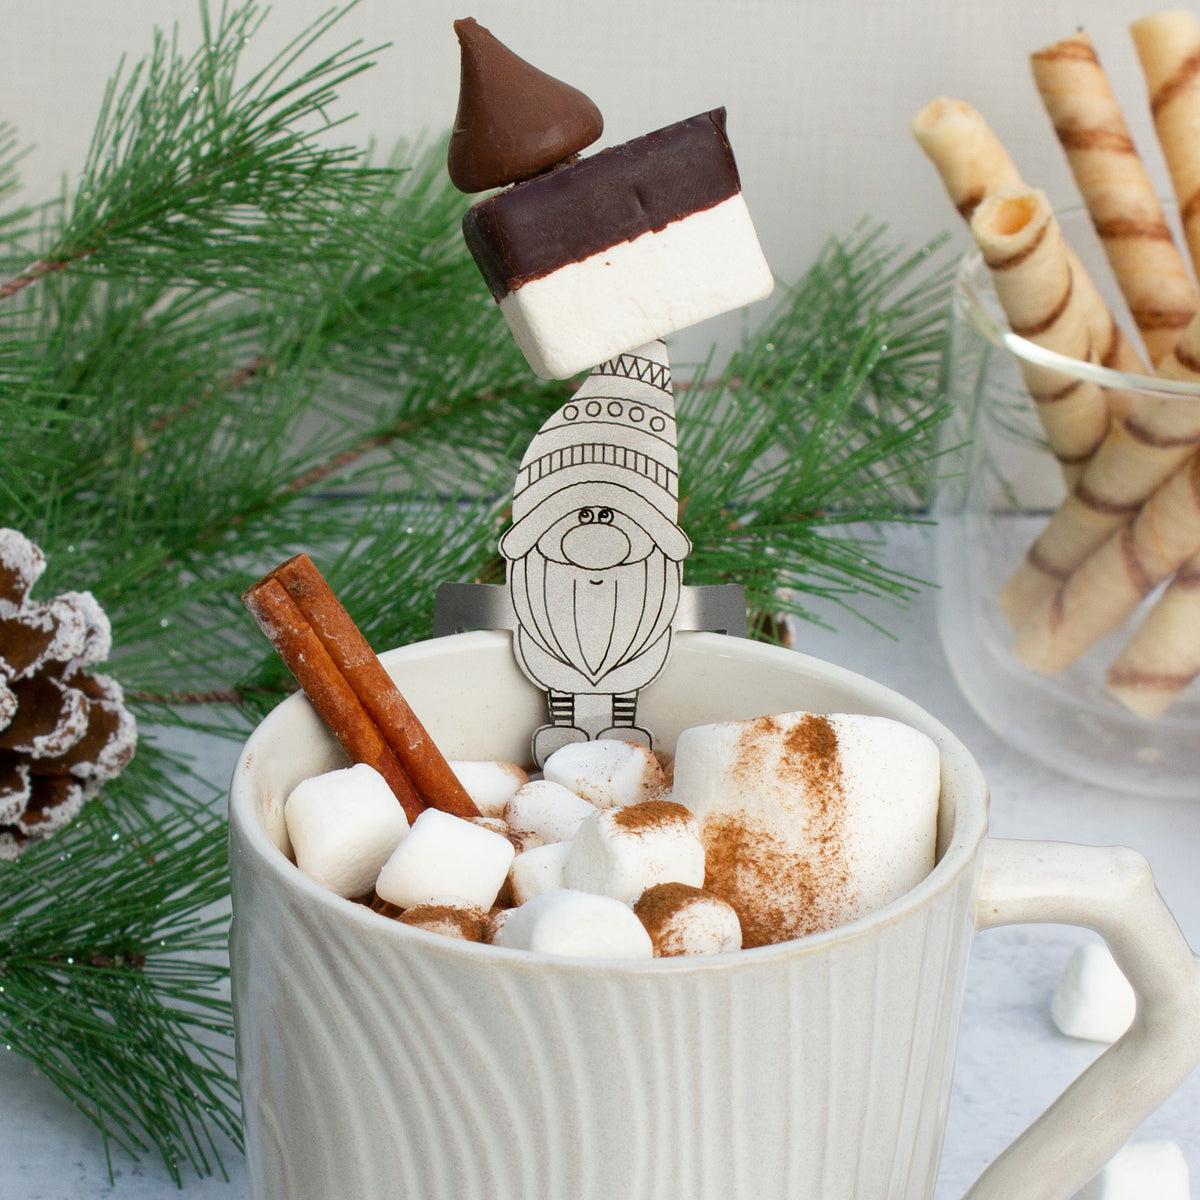 Marshmallow Hot Chocolate Stirrers + Reviews